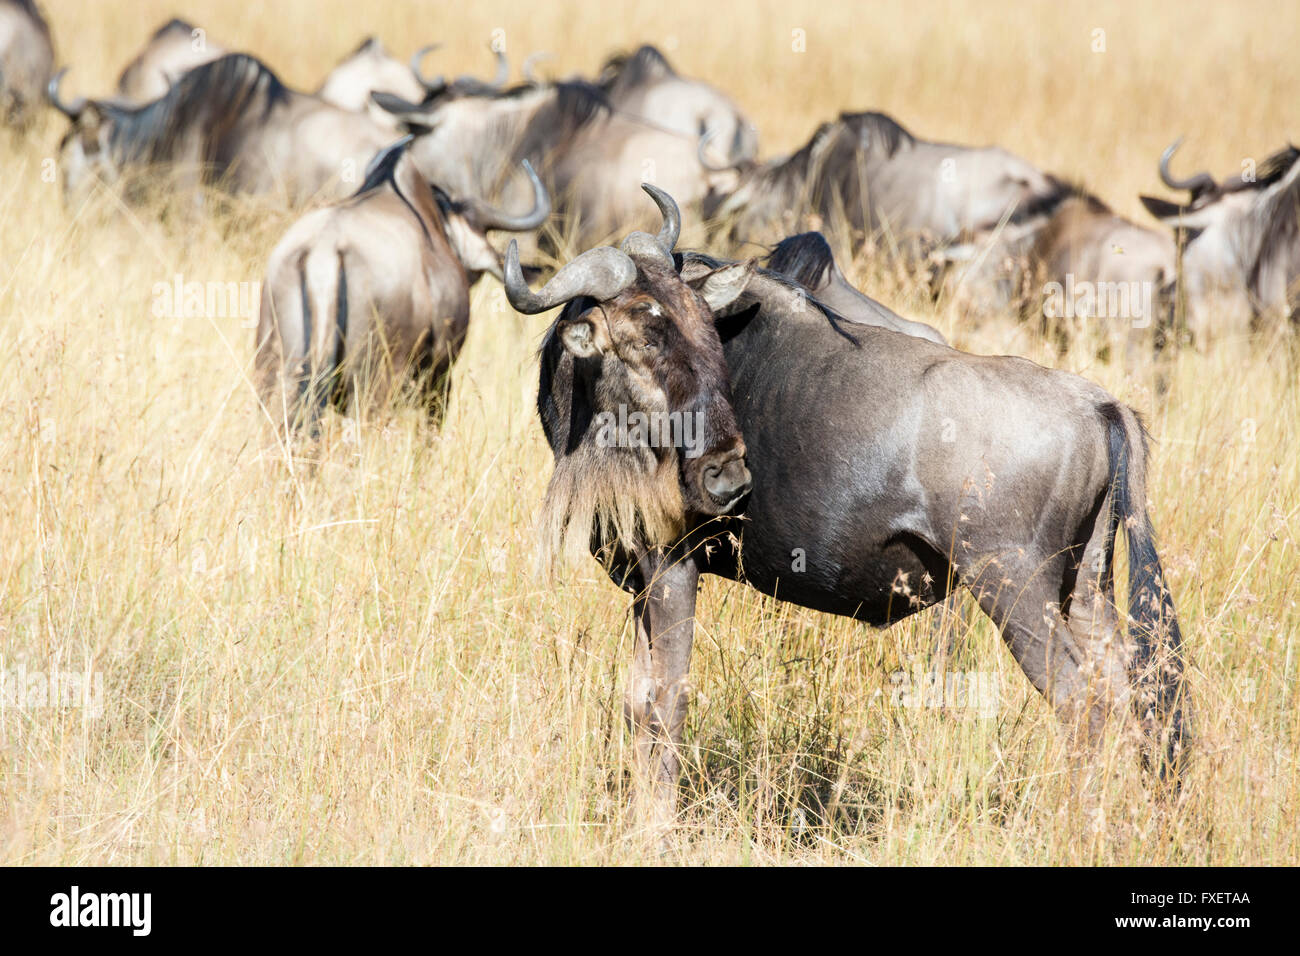 Side view of a Wildebeest, Connochaetes taurinus, Masai Mara National Reserve, Kenya, East Africa Stock Photo